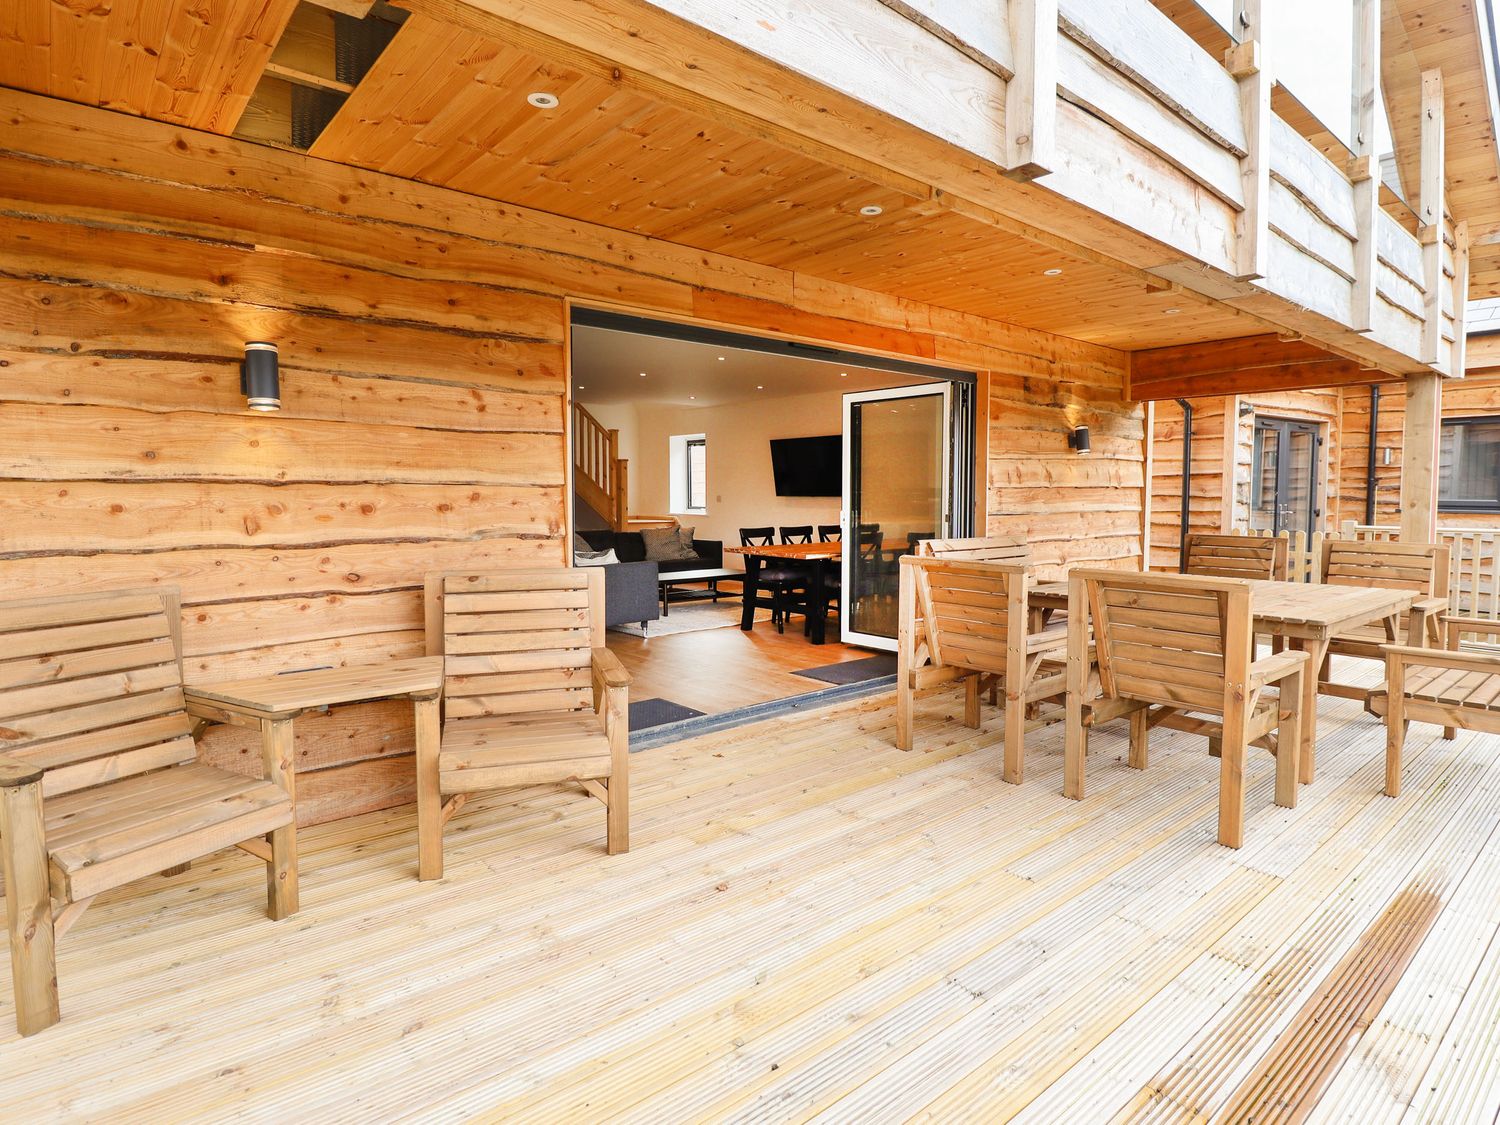 Lodge 21, South Hykeham, Lincolnshire, decking area with hot tub, lakeside views, off-road parking.